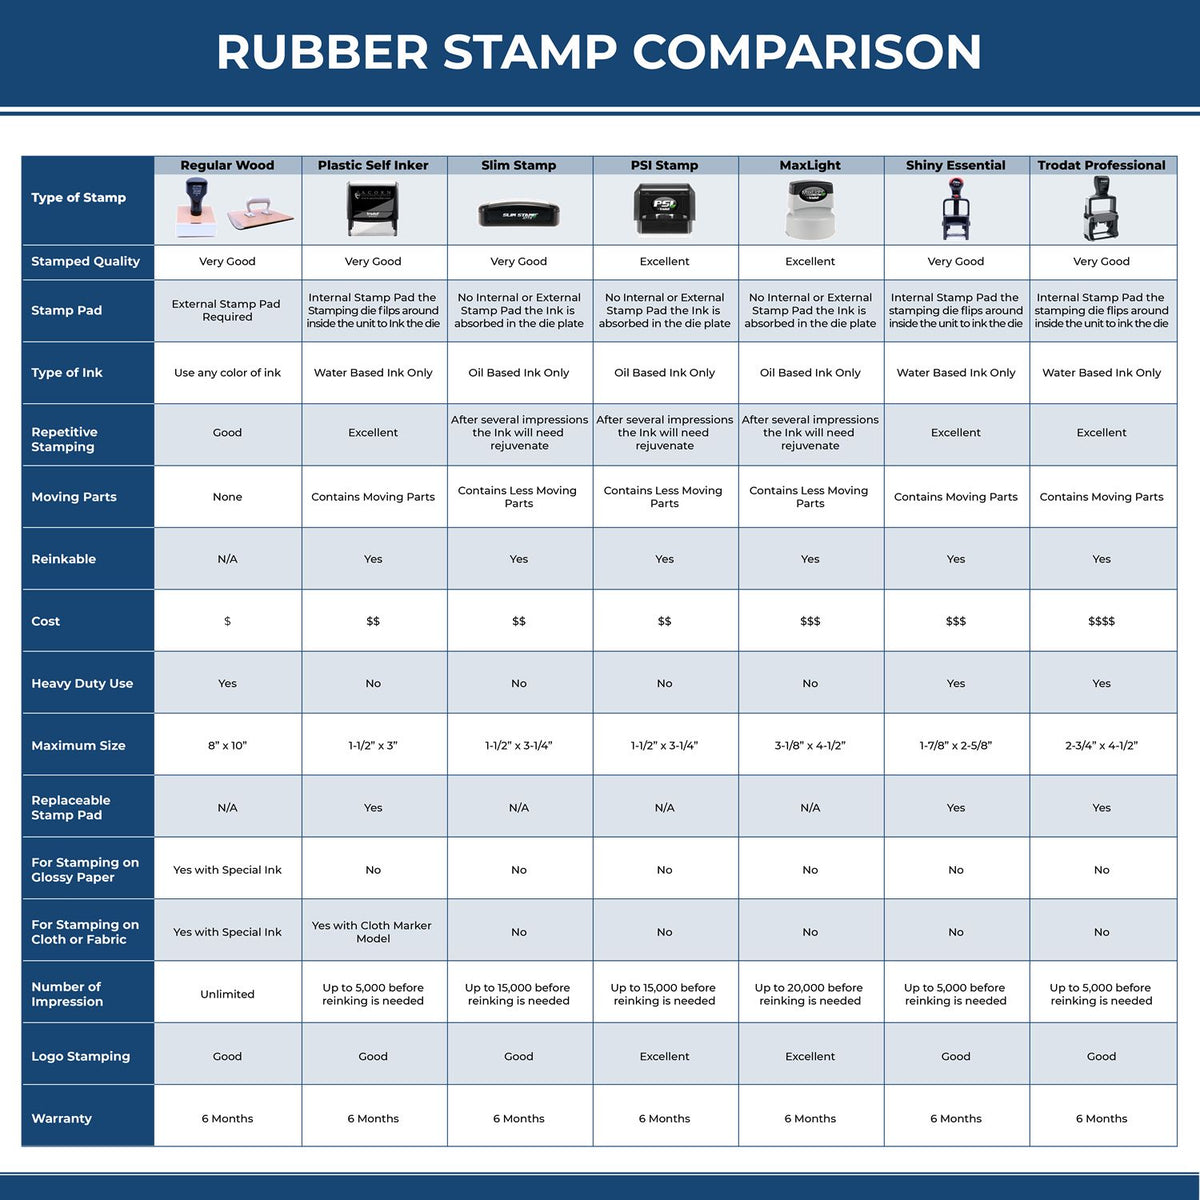 Your Insurance has Paid their Portion Rubber Stamp 4455R Rubber Stamp Comparison